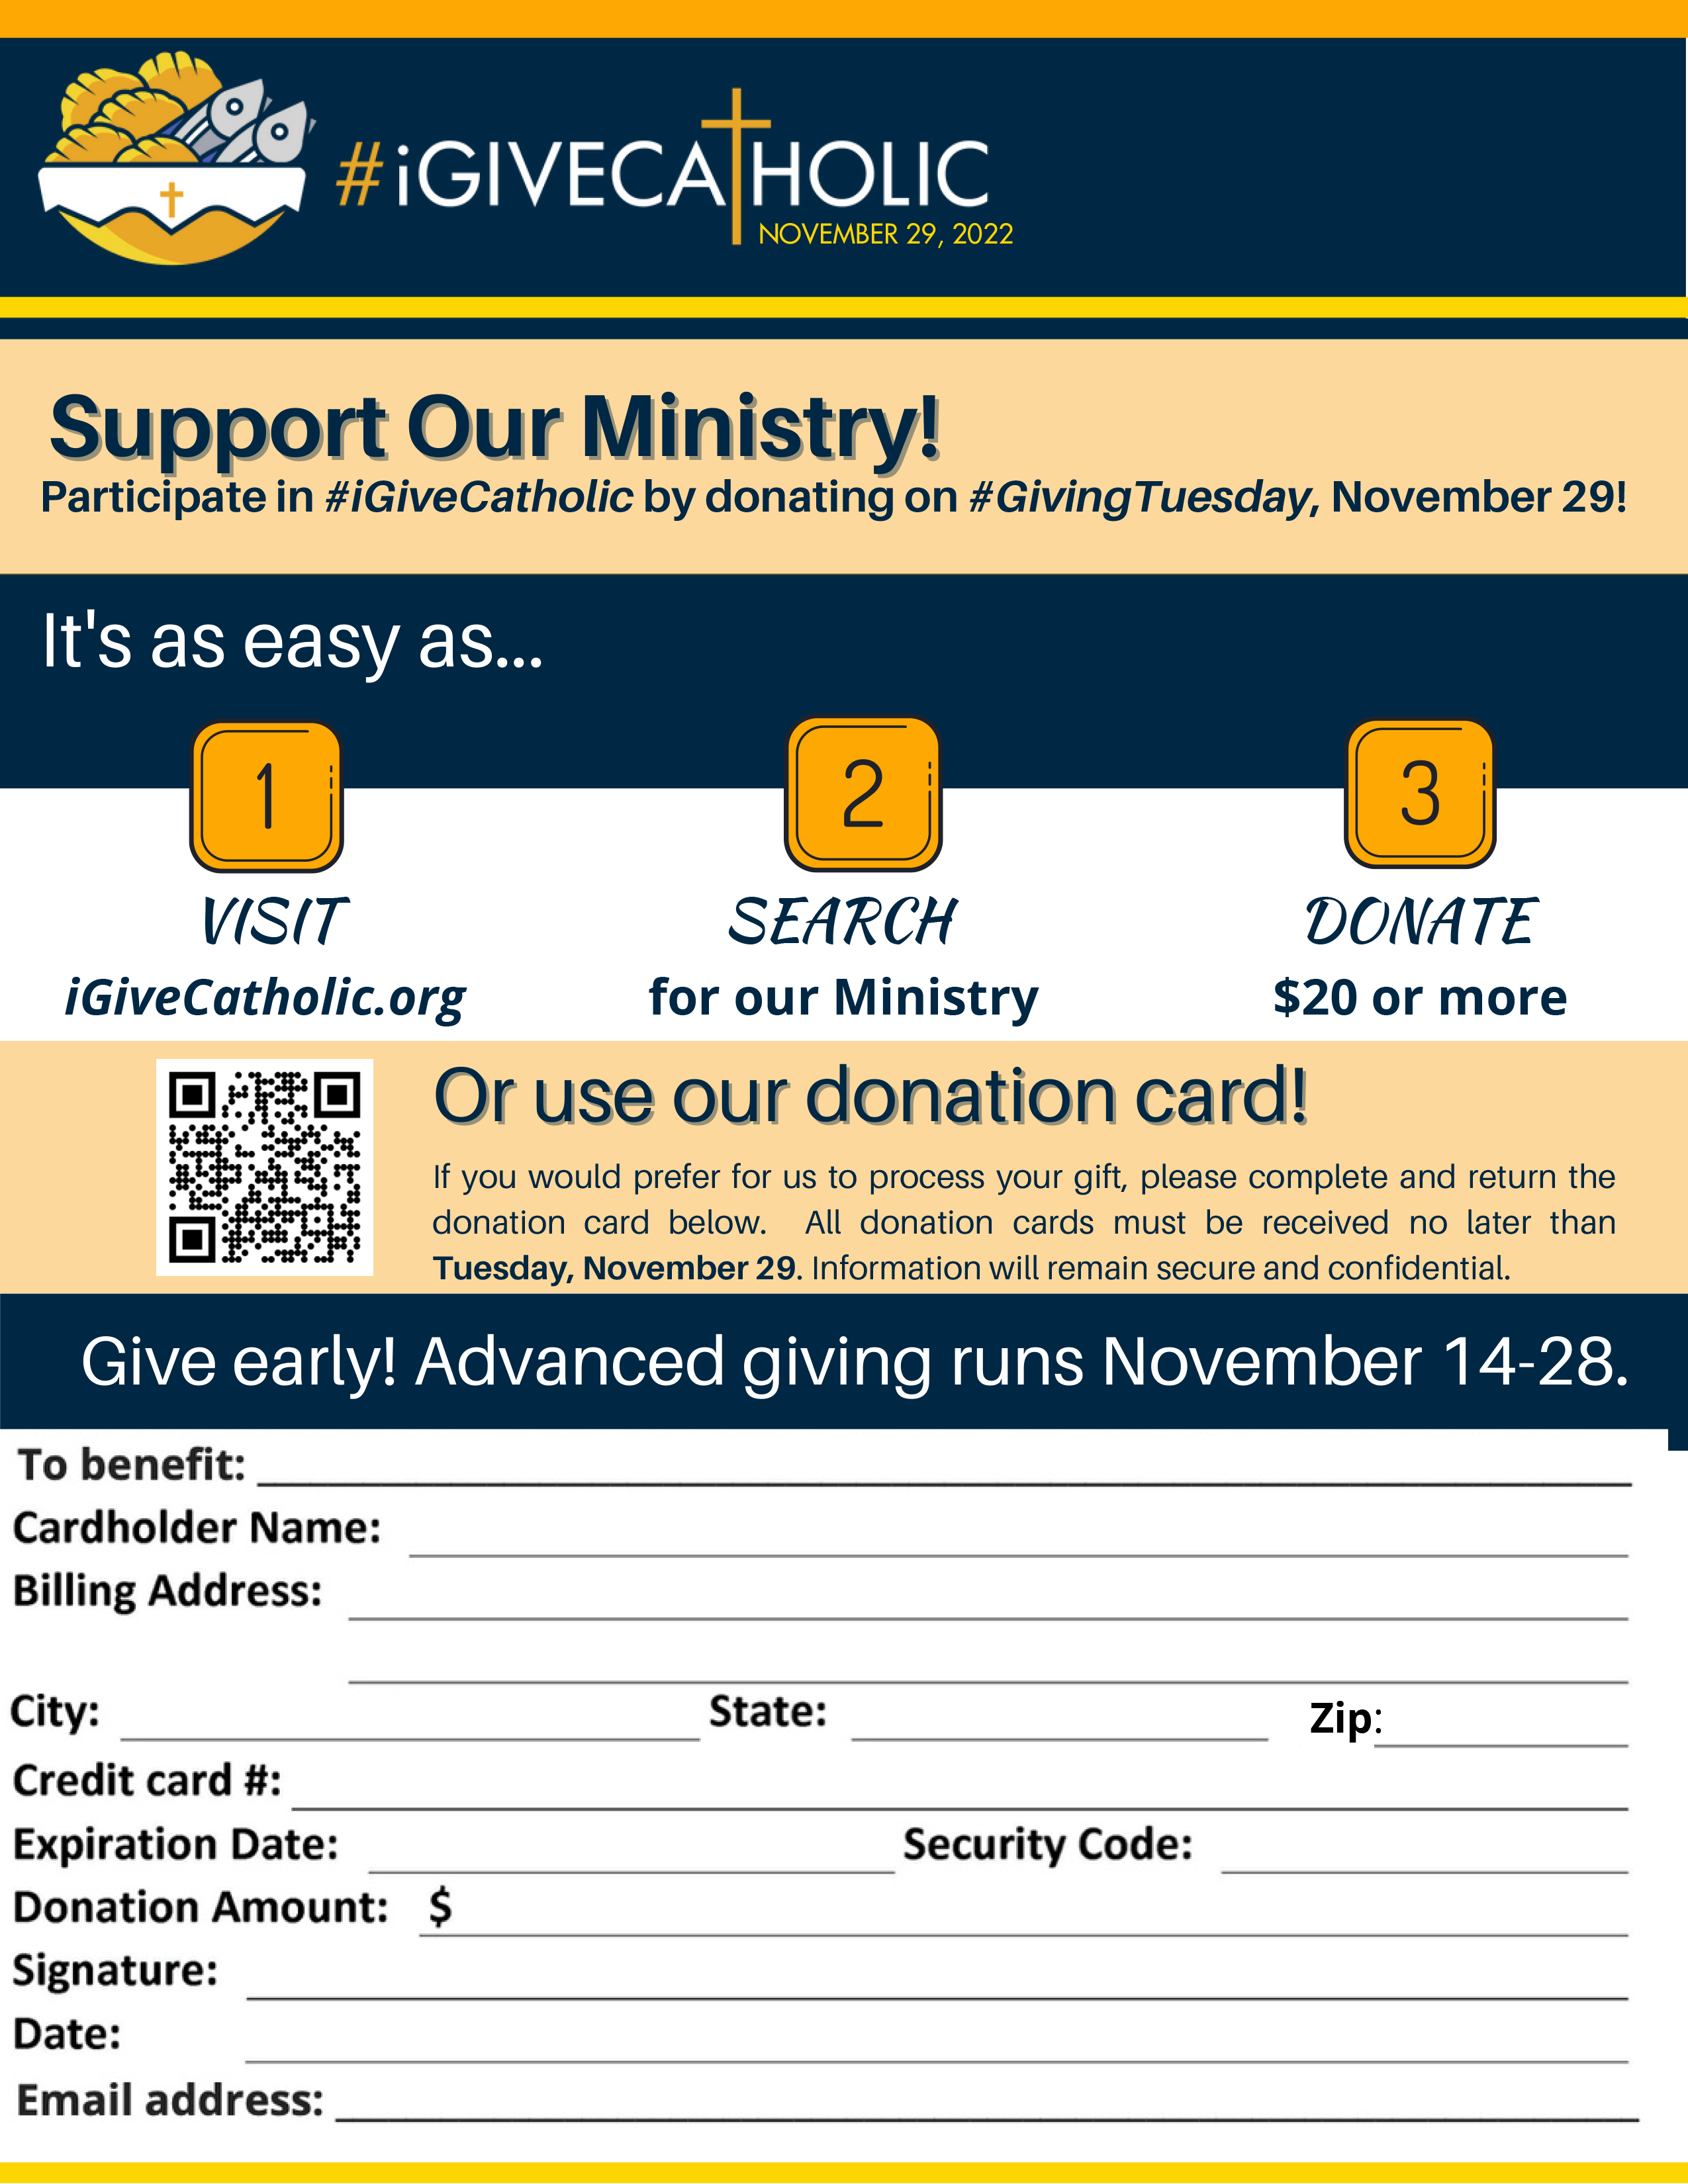 Bulletin Insert with Donation Card Bundle